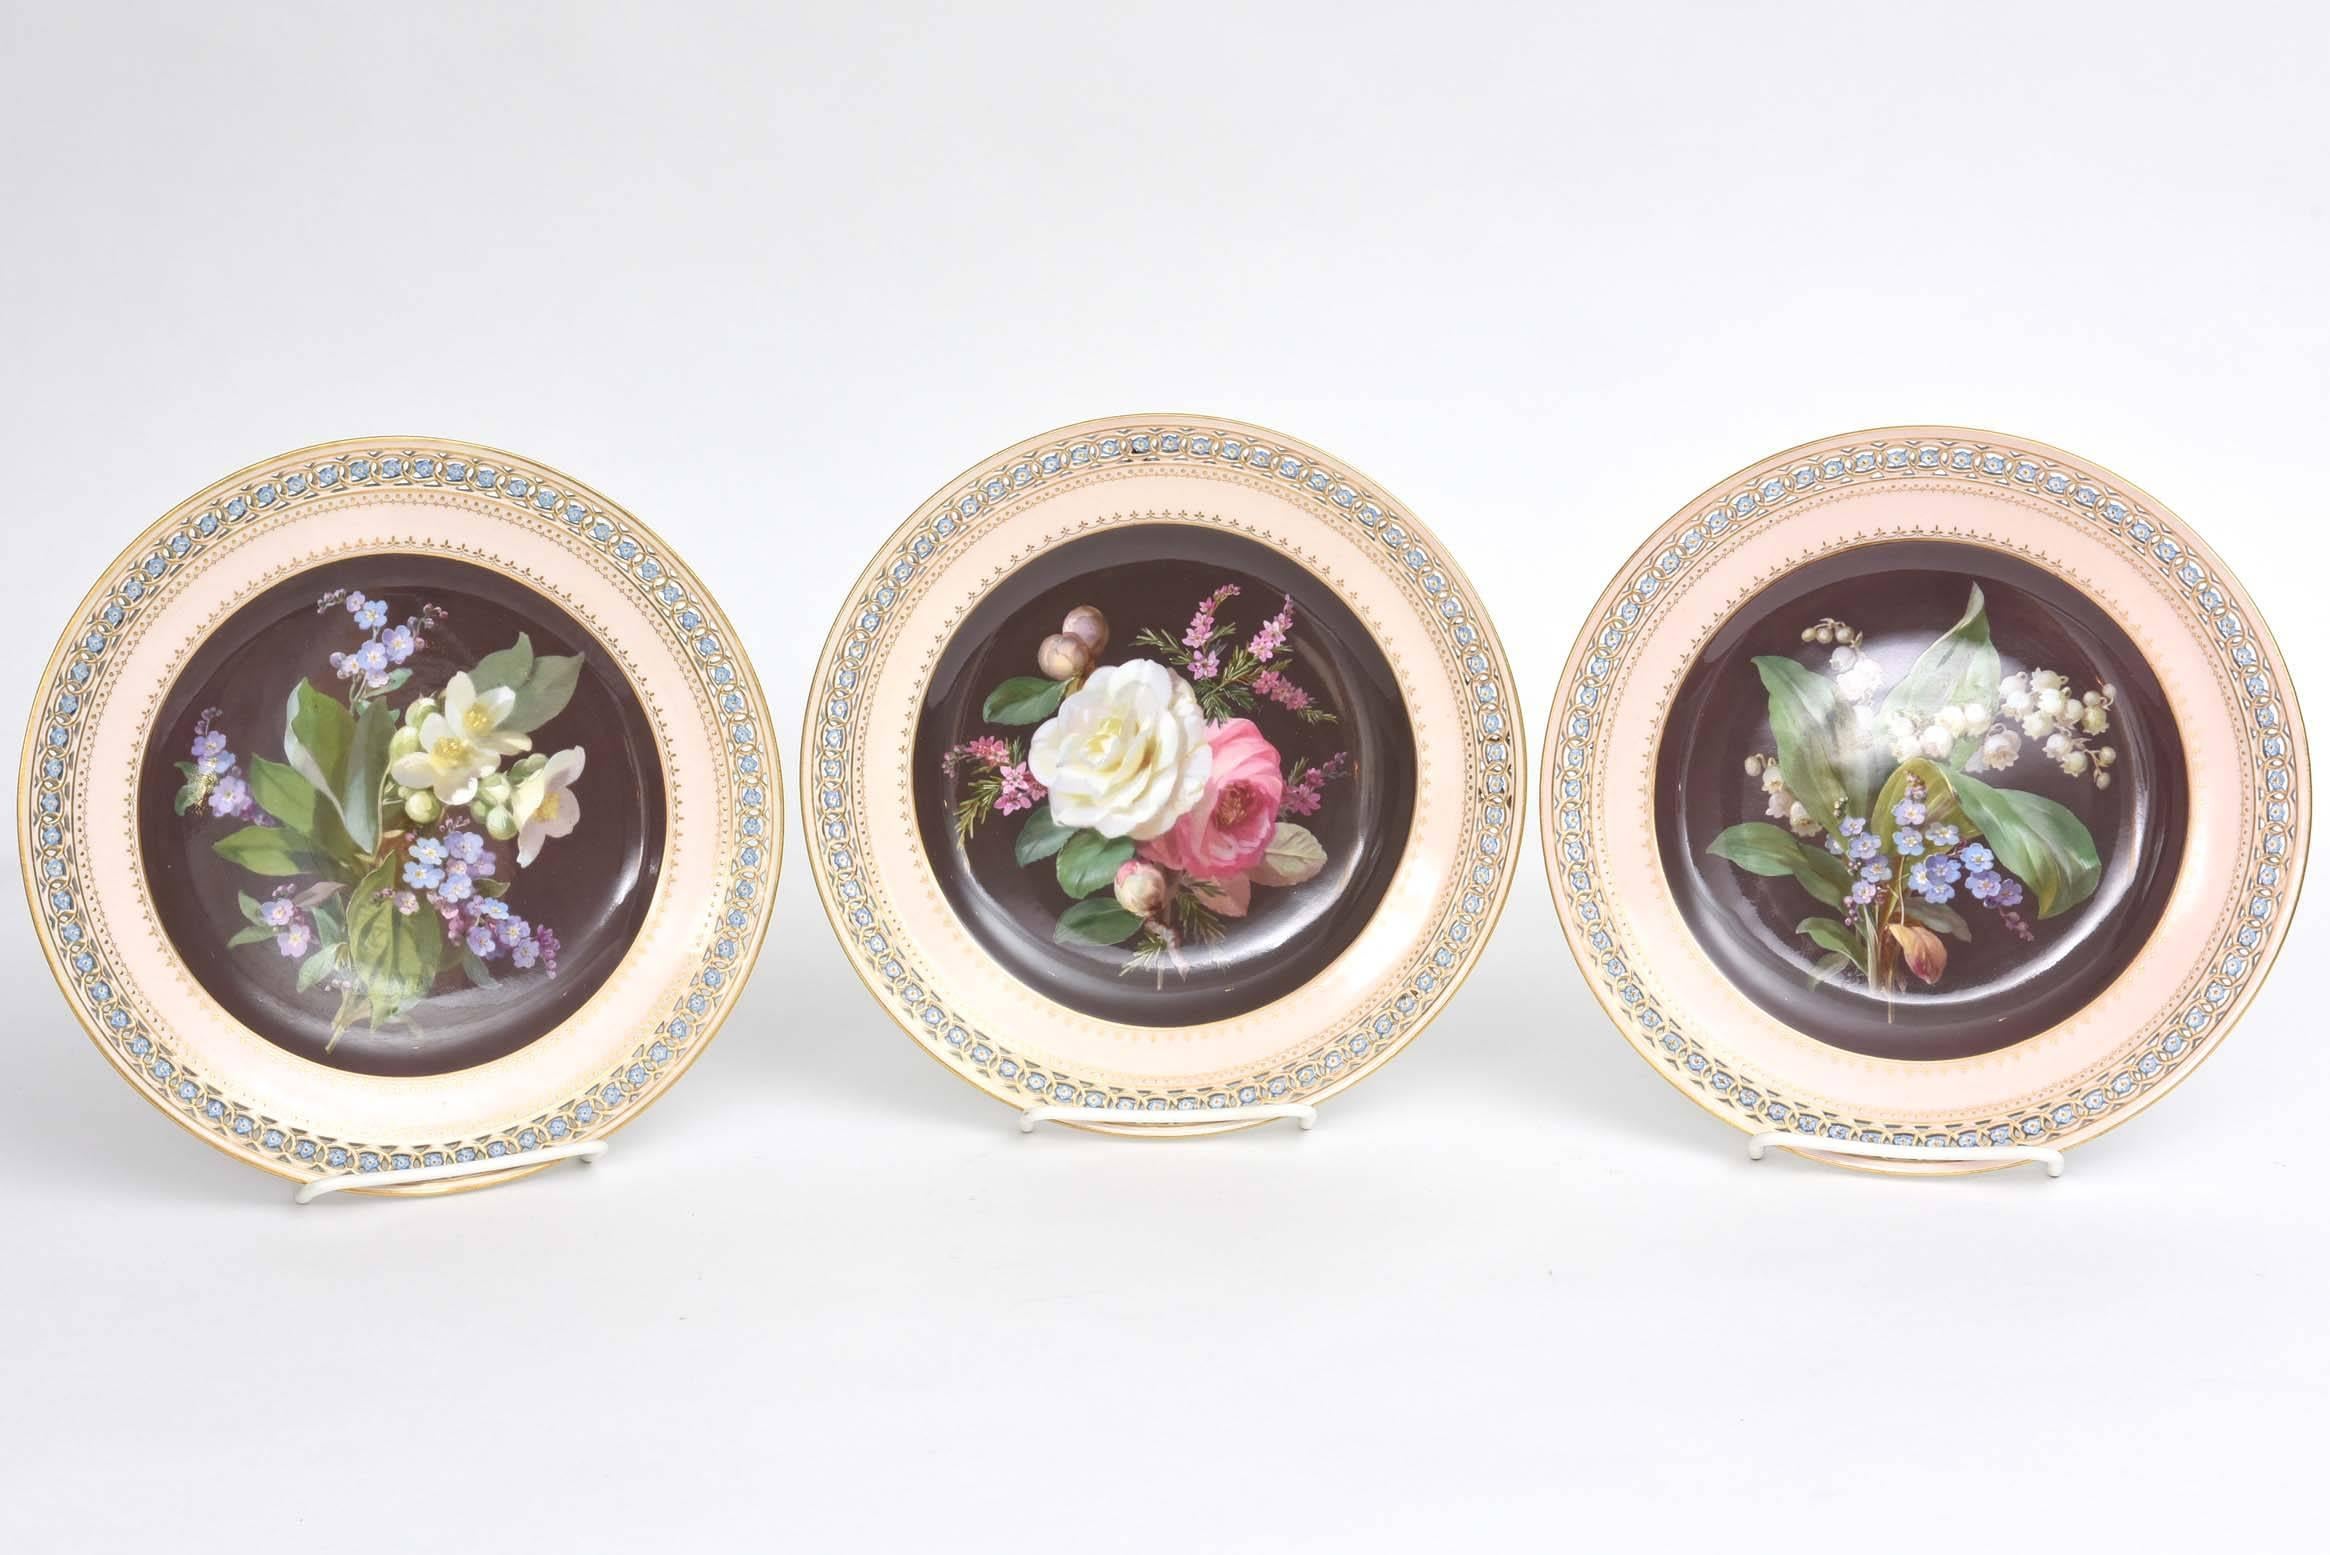 One of our finest sets of hand-painted porcelain sets from the storied firm of Meissen, Germany. These handcrafted and hand-painted pieces date from the 19th century and feature crisp and beautifully painted florals on a contrasting dark ground.